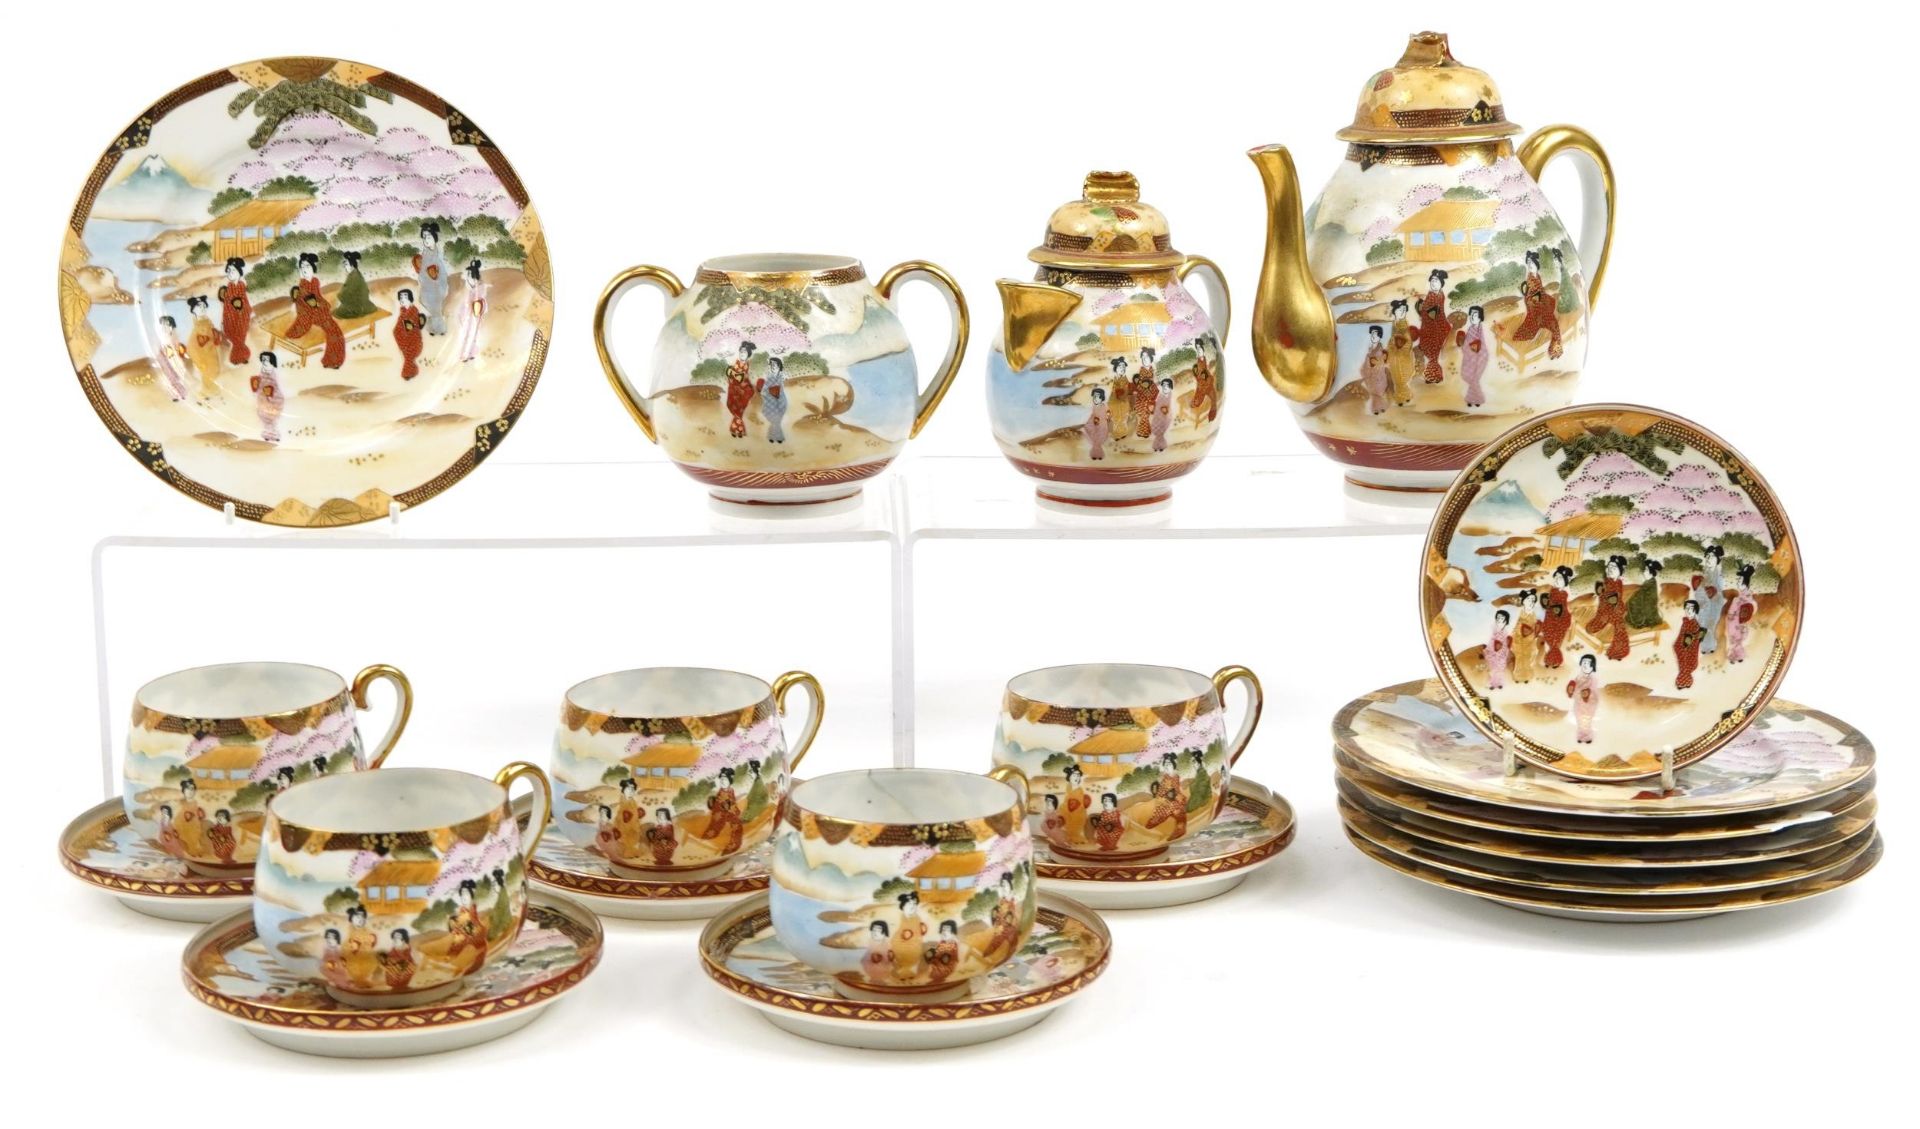 Japanese porcelain tea service hand painted with figures including a teapot and trios, the largest